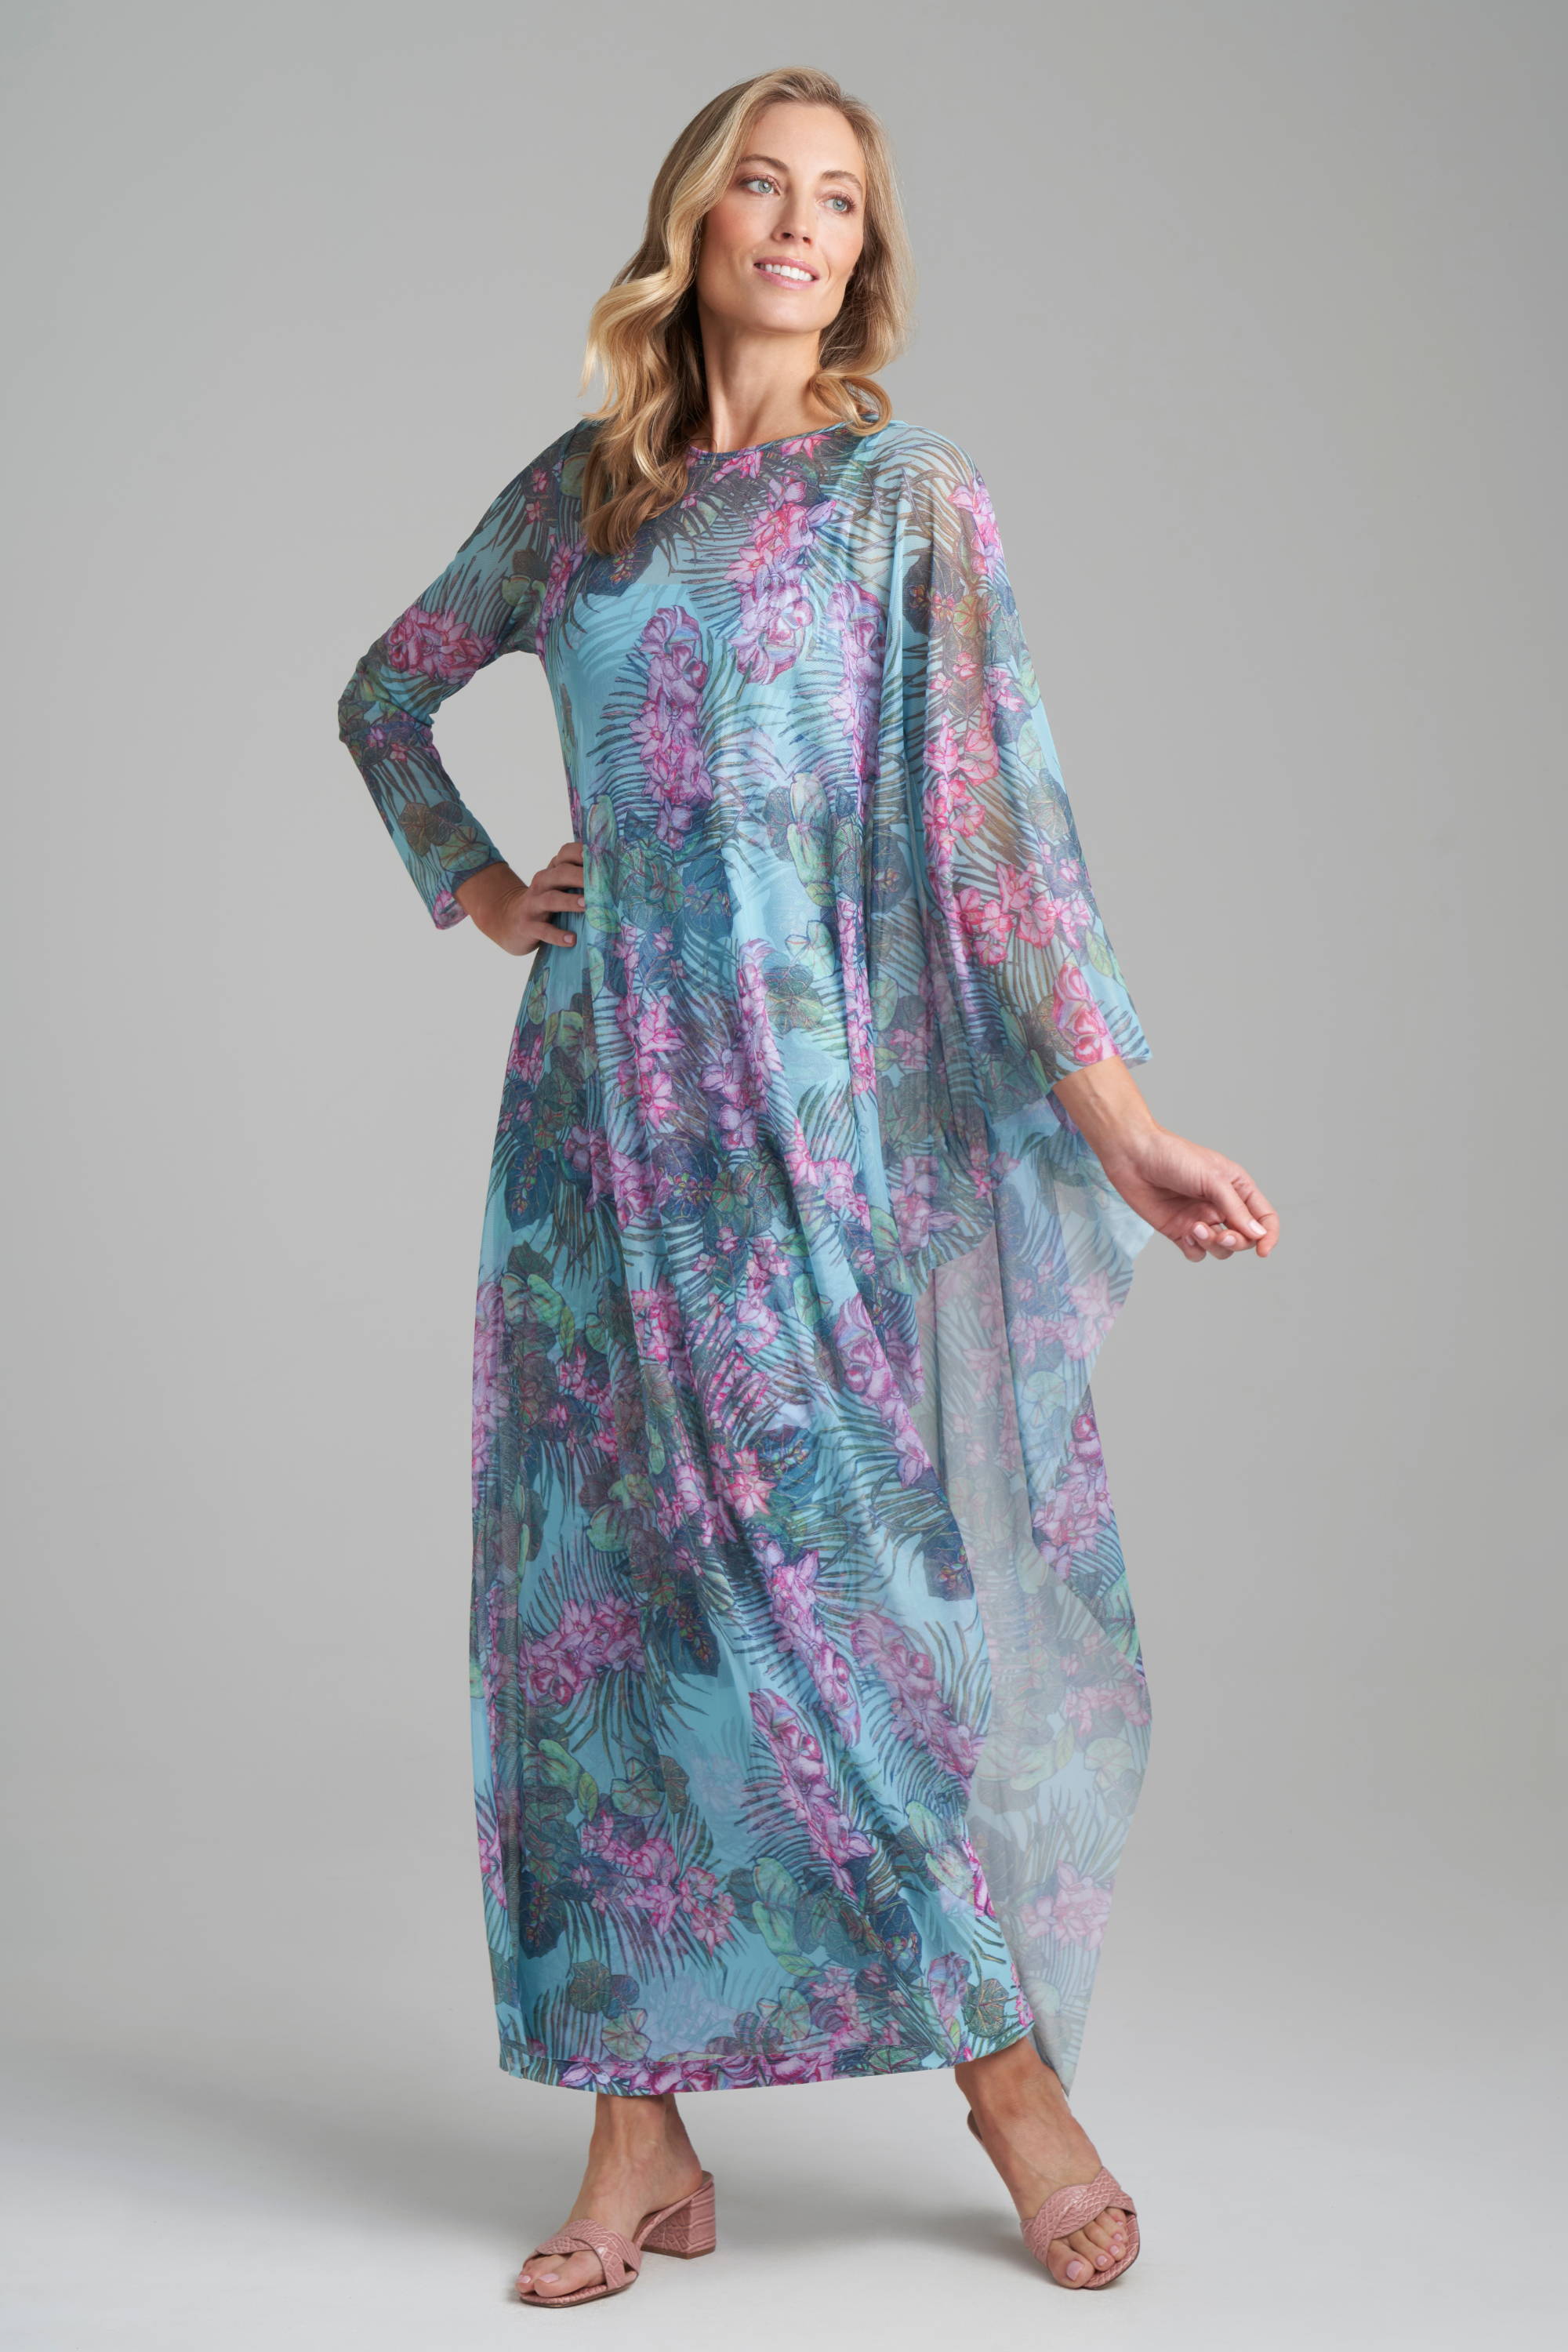 Woman wearing mesh floral printed kaftan over long floral printed stretch knit dress by Ala von Auersperg